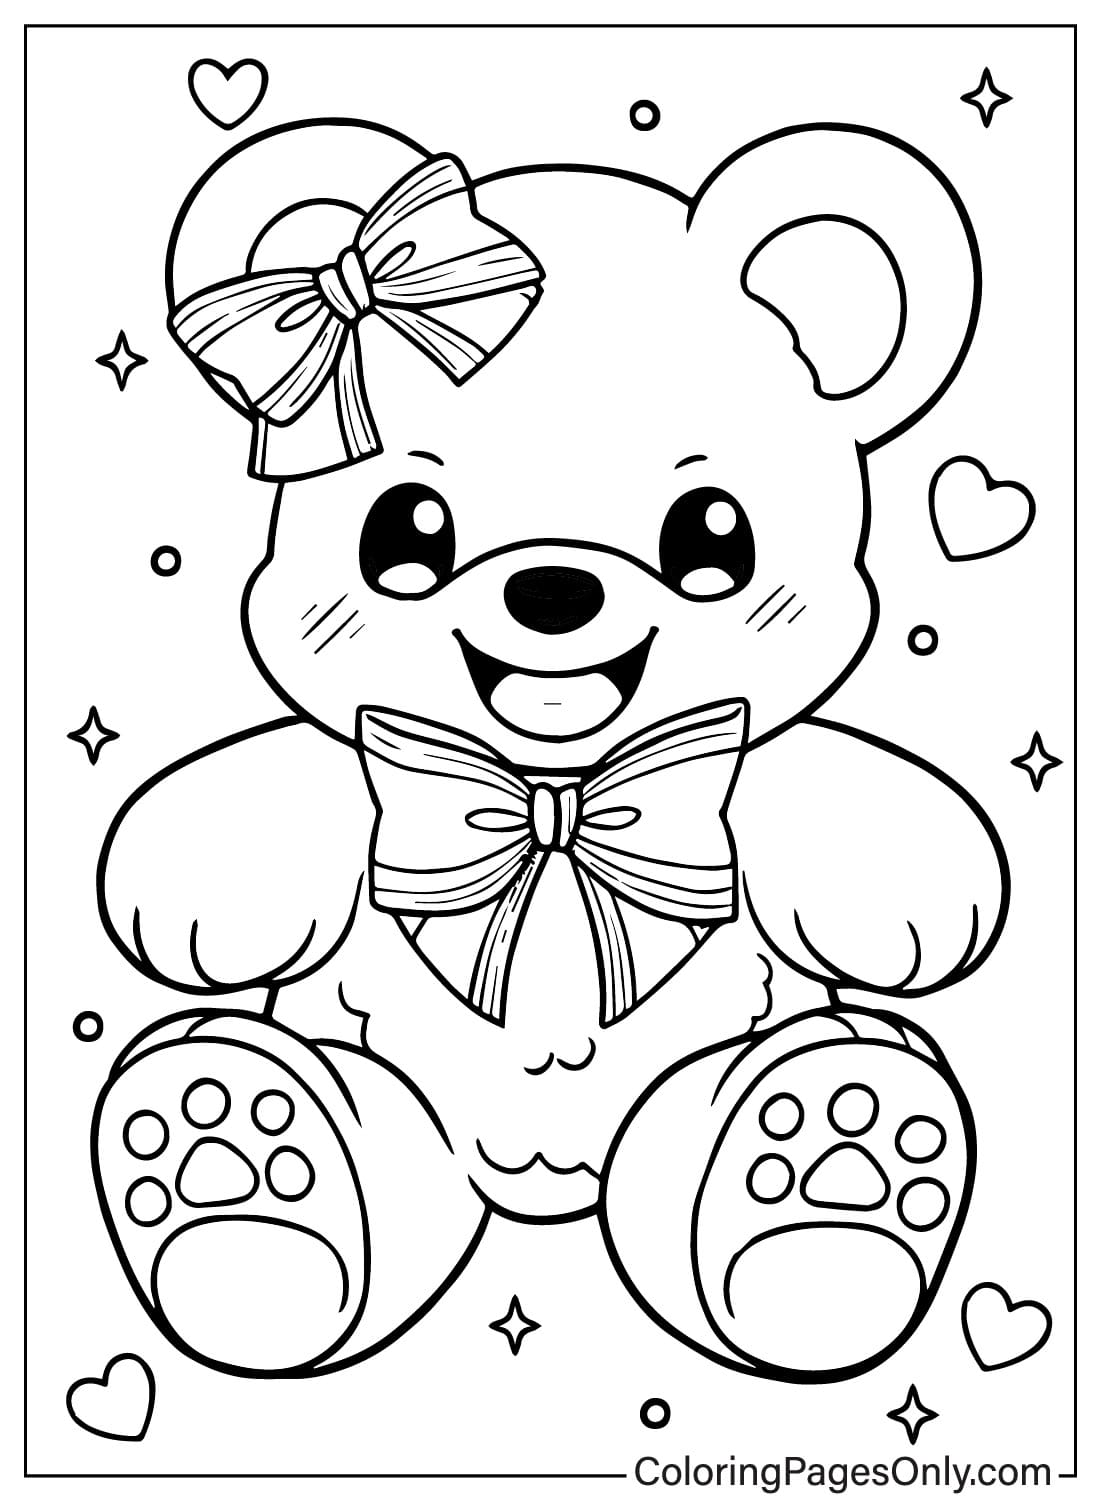 Teddy Bear Coloring Page to Print